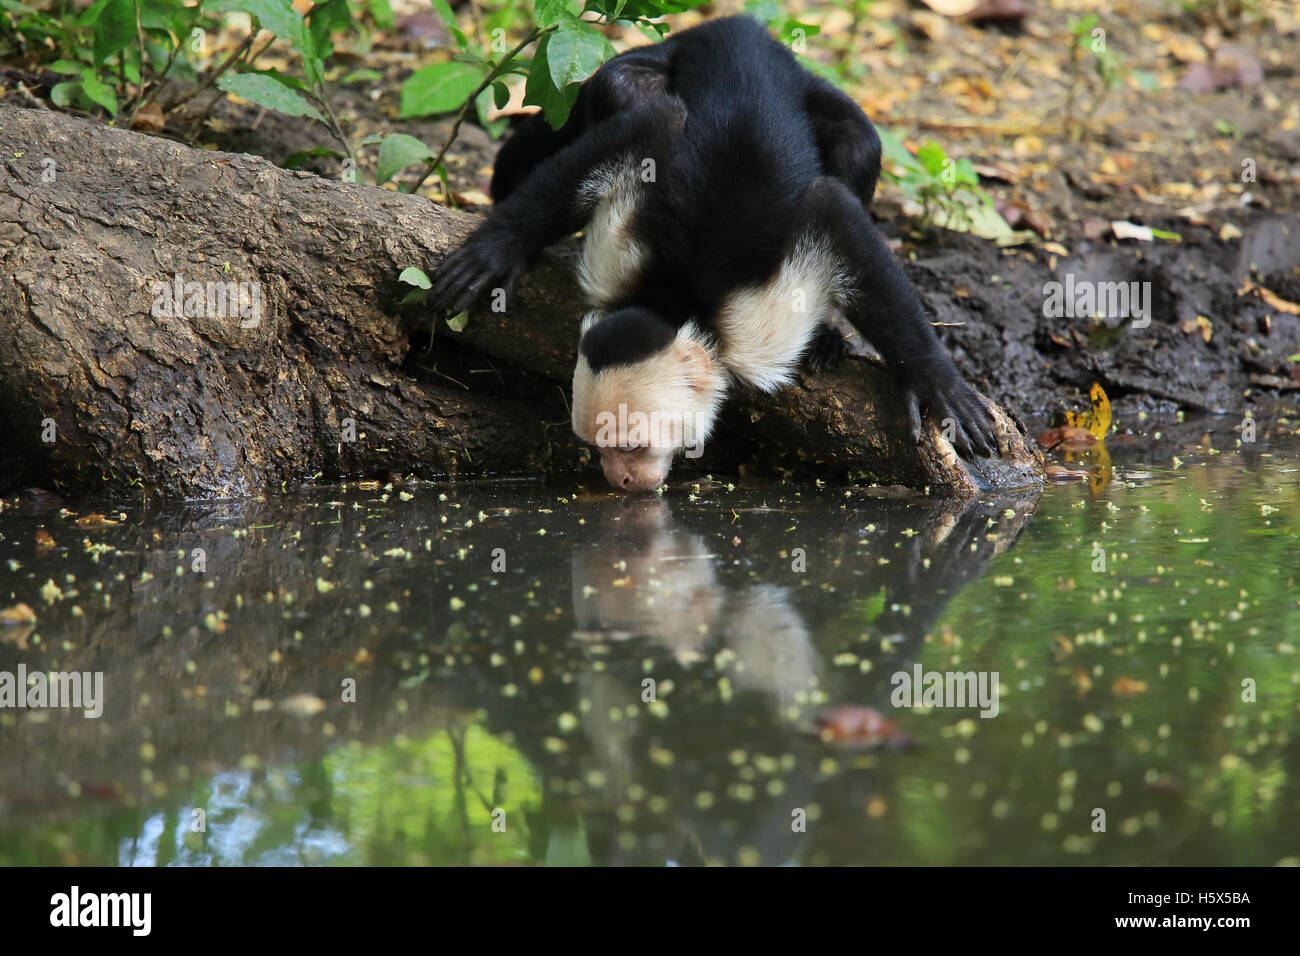 White-faced capuchin monkey (Cebus capucinus) drinking from pool. Palo Verde National Park, Guanacaste, Costa Rica. Stock Photo